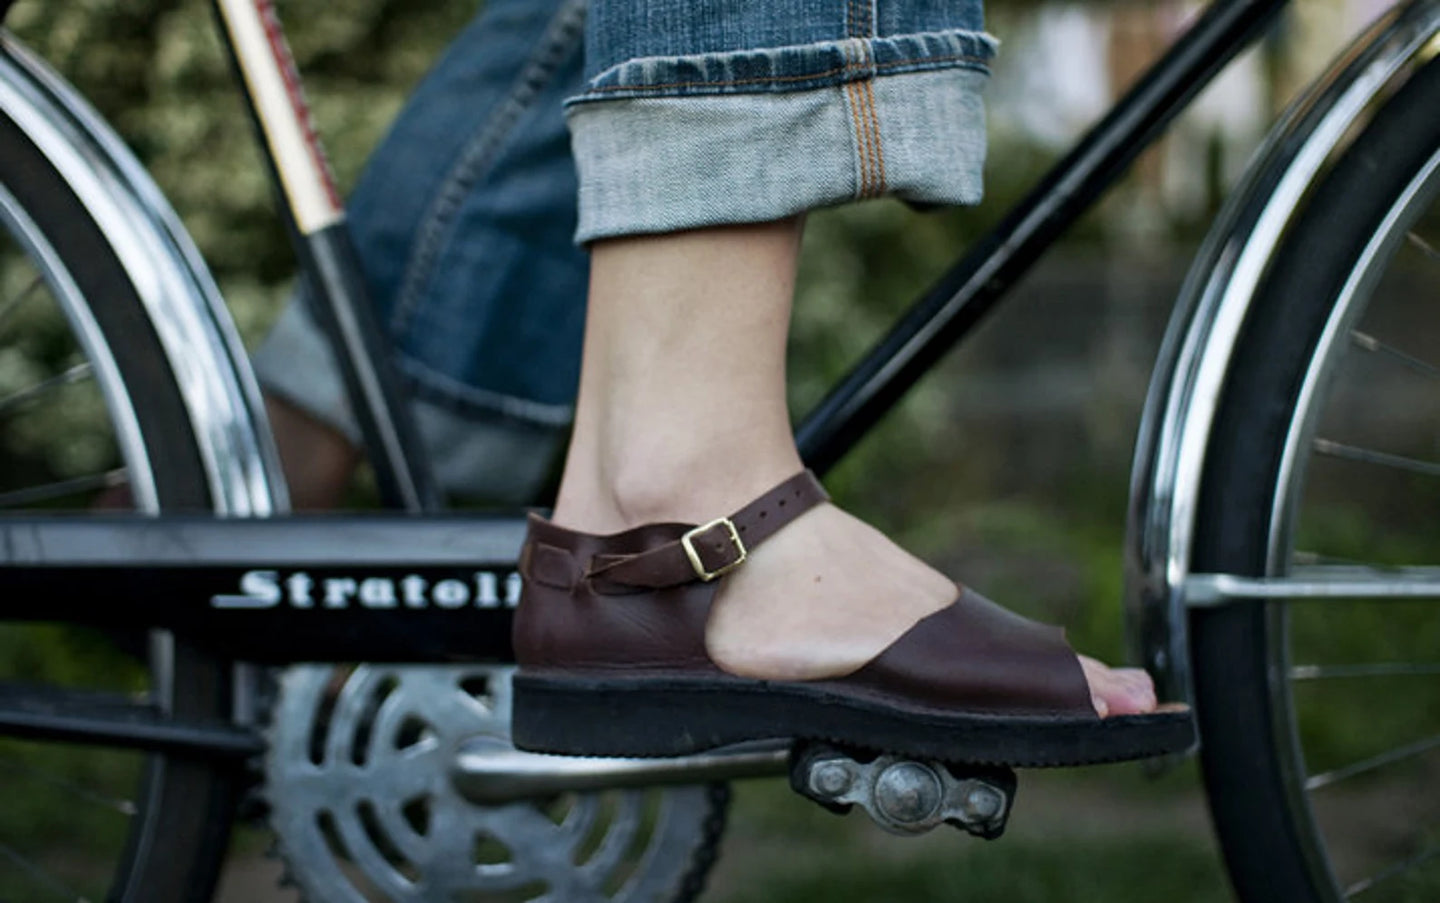 Model is wearing a brown pair of Handmade Leather New Mexican Sandals by Aurora Shoe Co.   The model is wearing rolled blue jeans and no socks, pedaling a vintage black bicycle with chrome fenders.